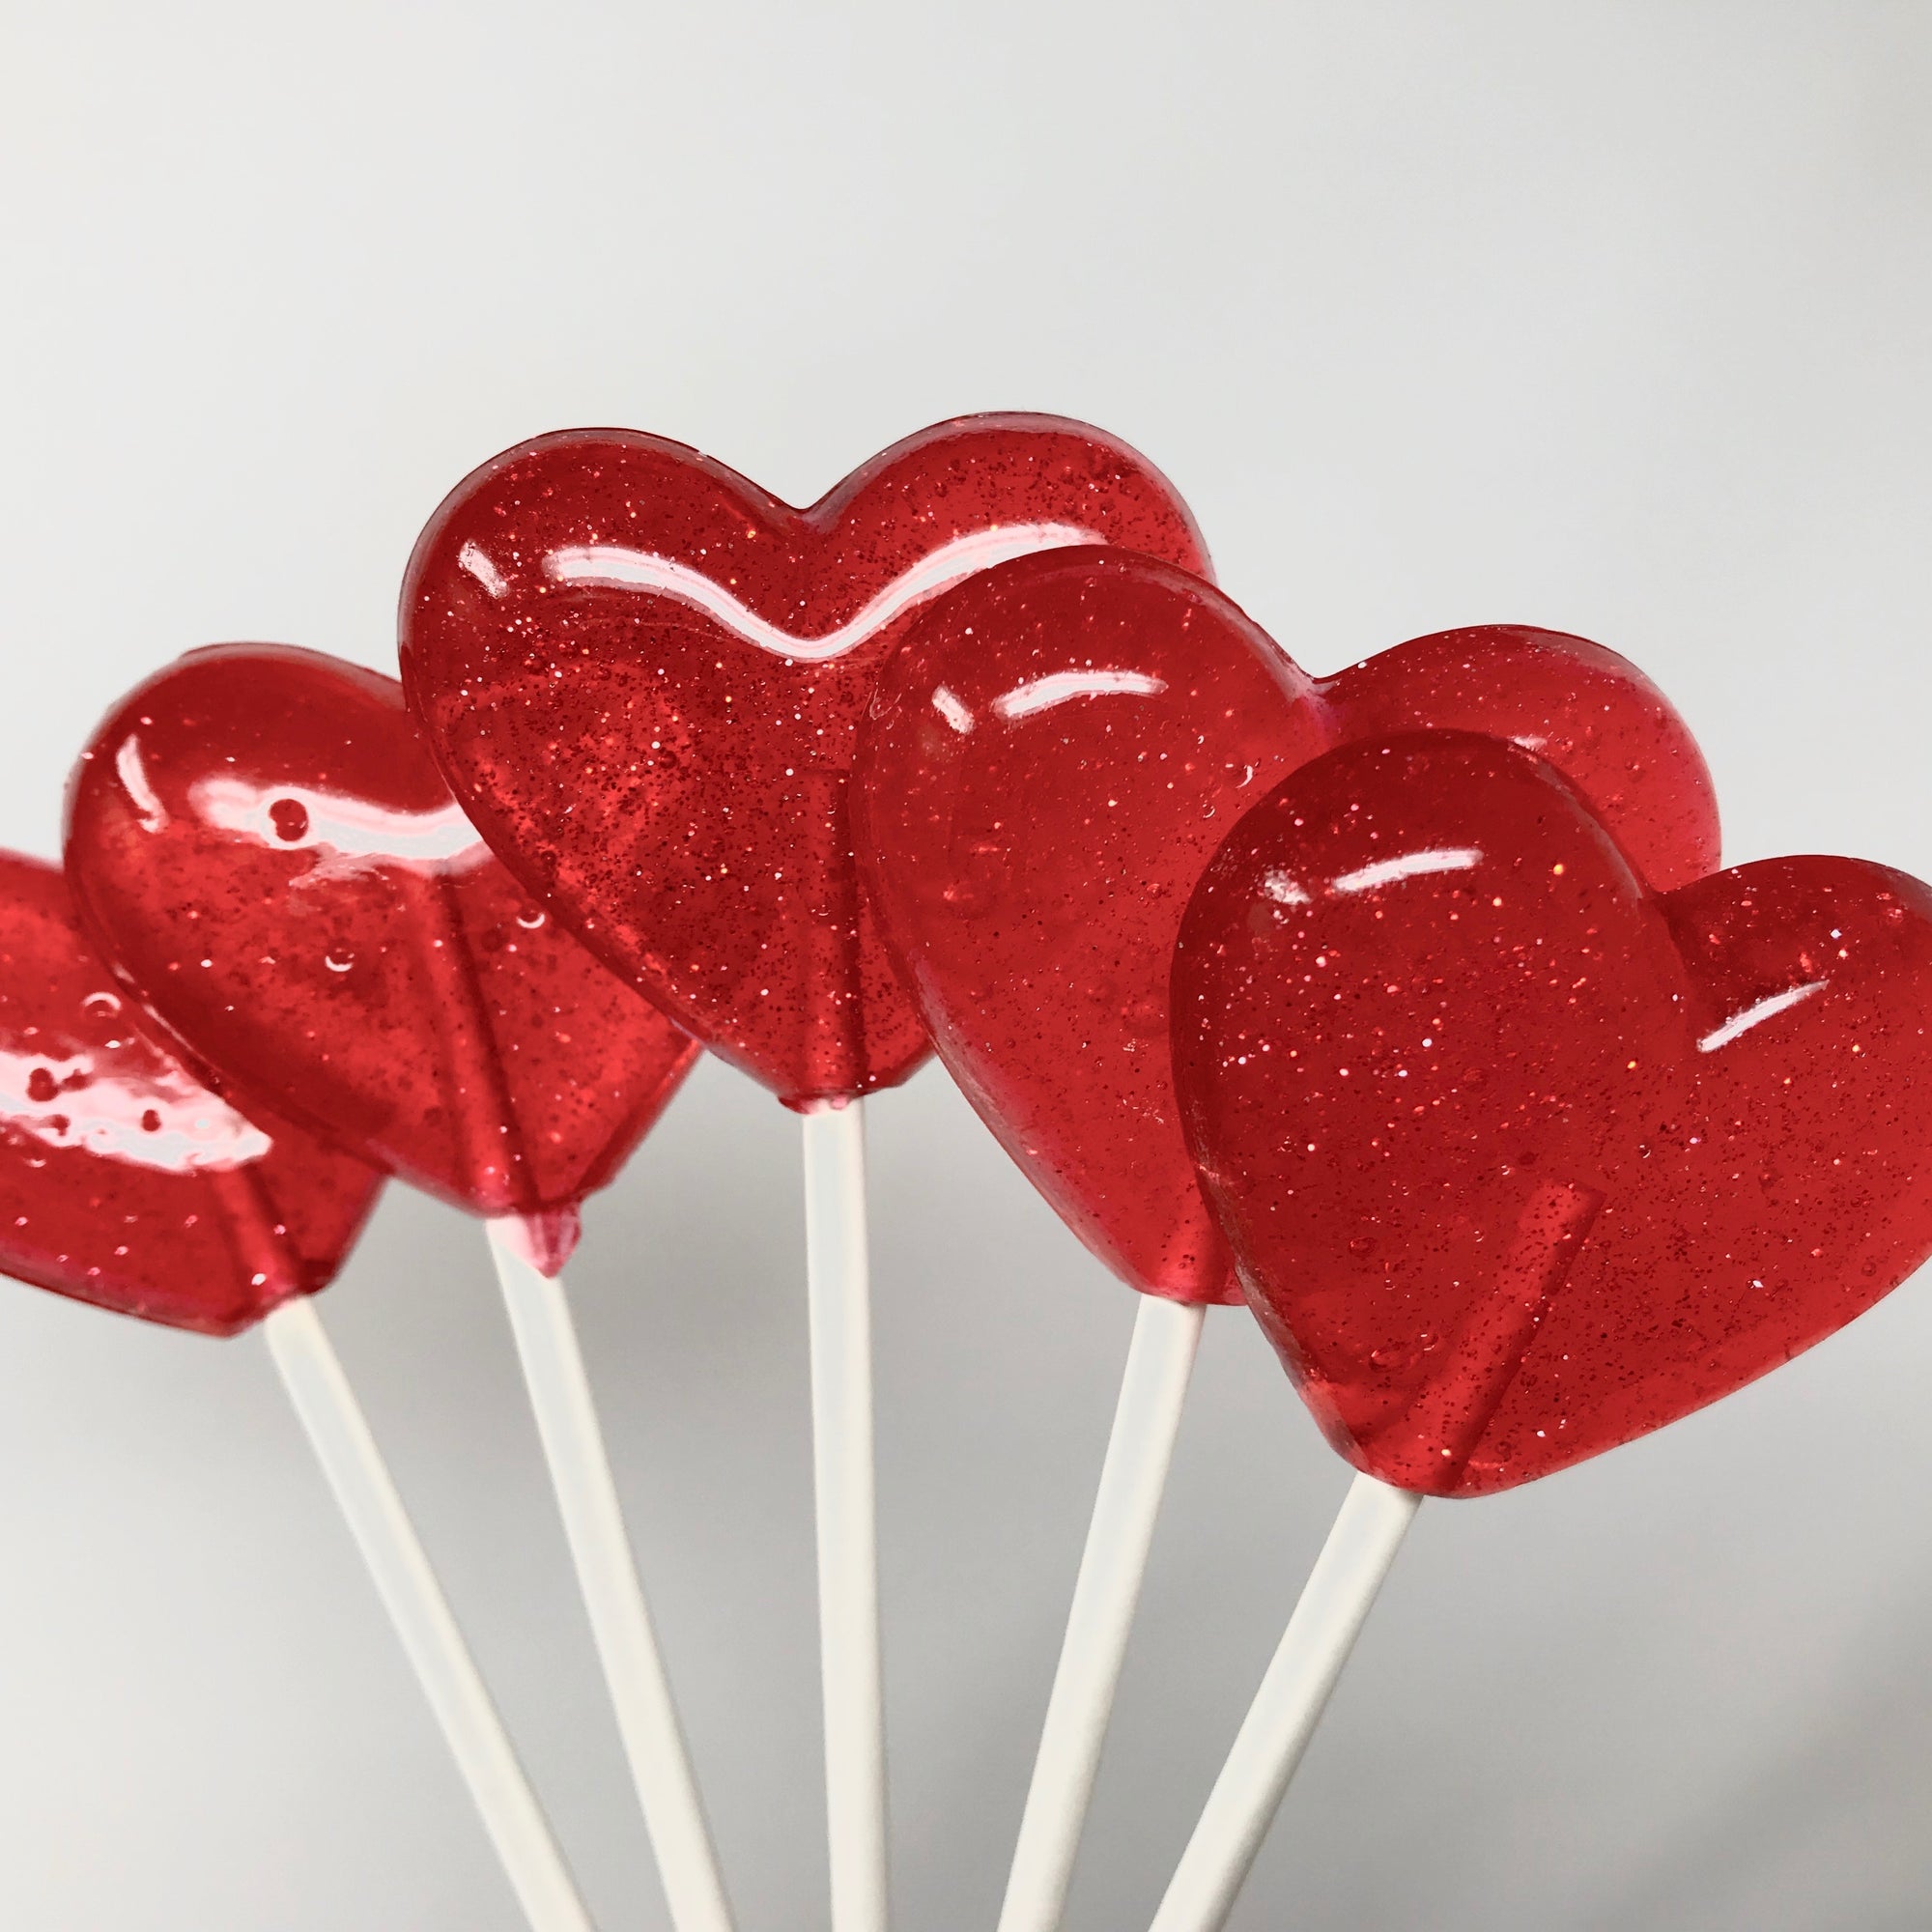 Red Glitter Heart Lollipops 6-piece set by I Want Candy!